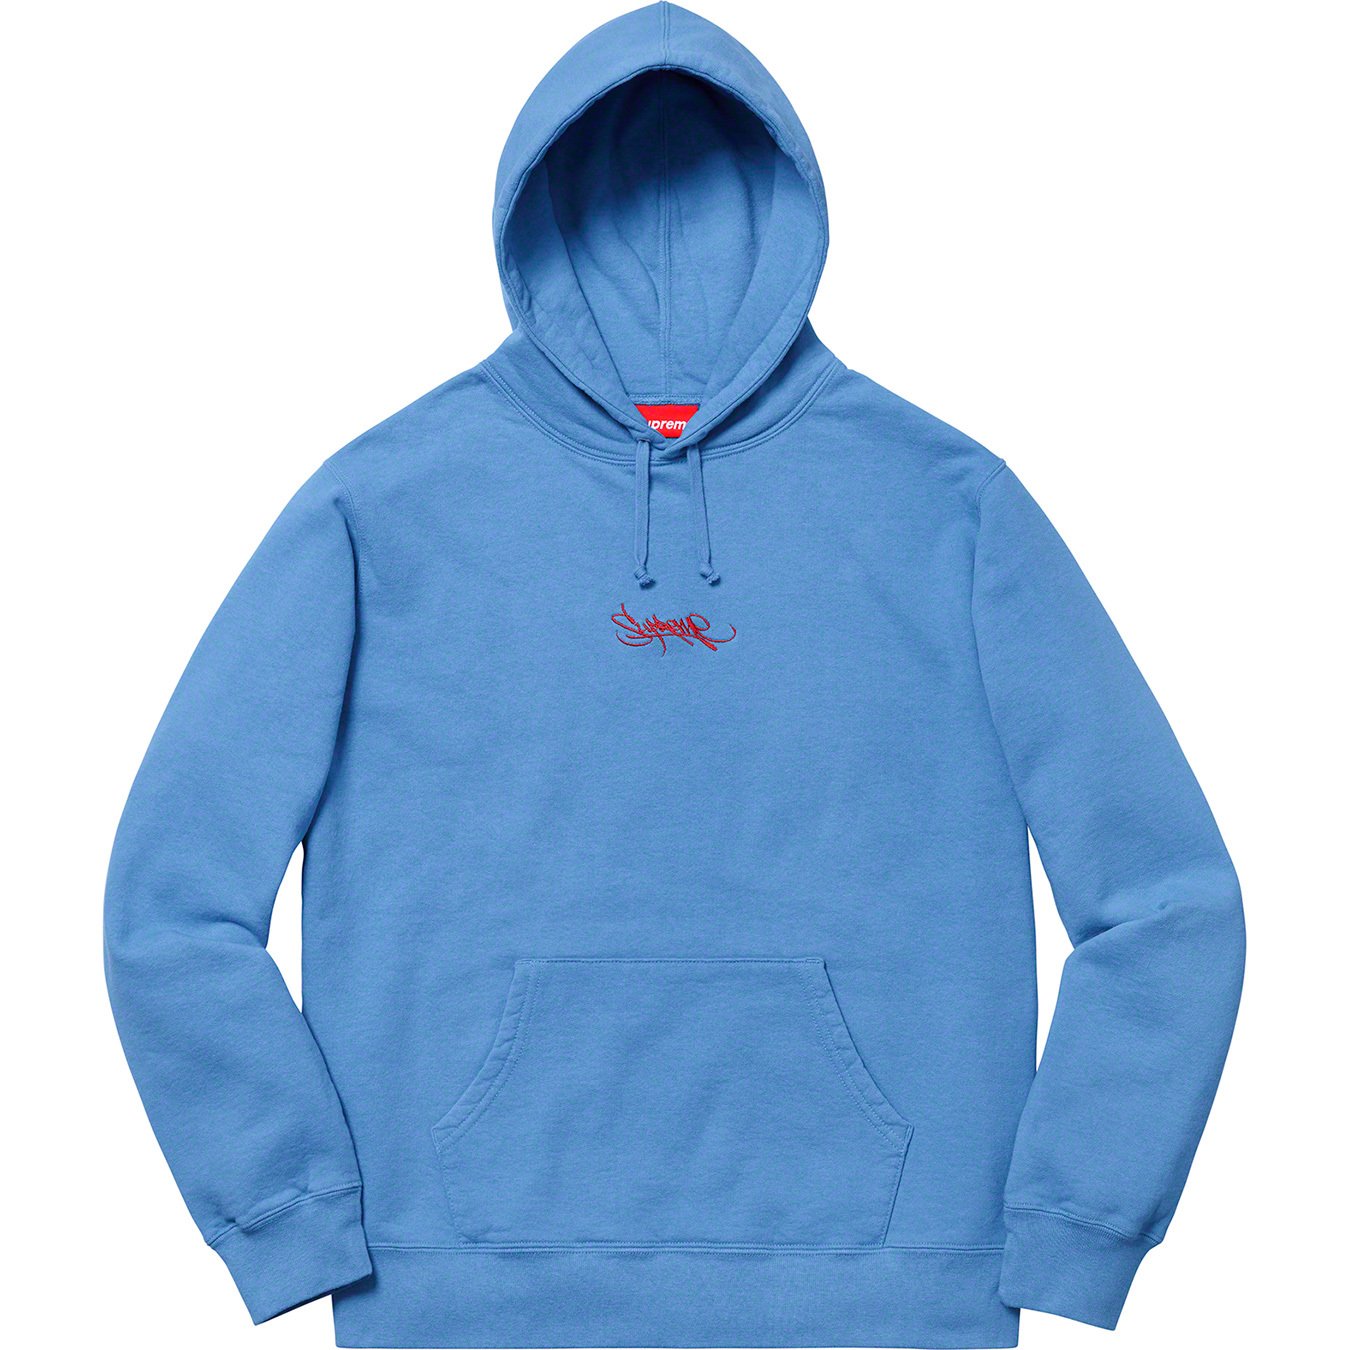 Supreme Thermal Zip Up Sweatshirt Dusty Blue. LARGE BRAND NEW WITH TAG &  BAG